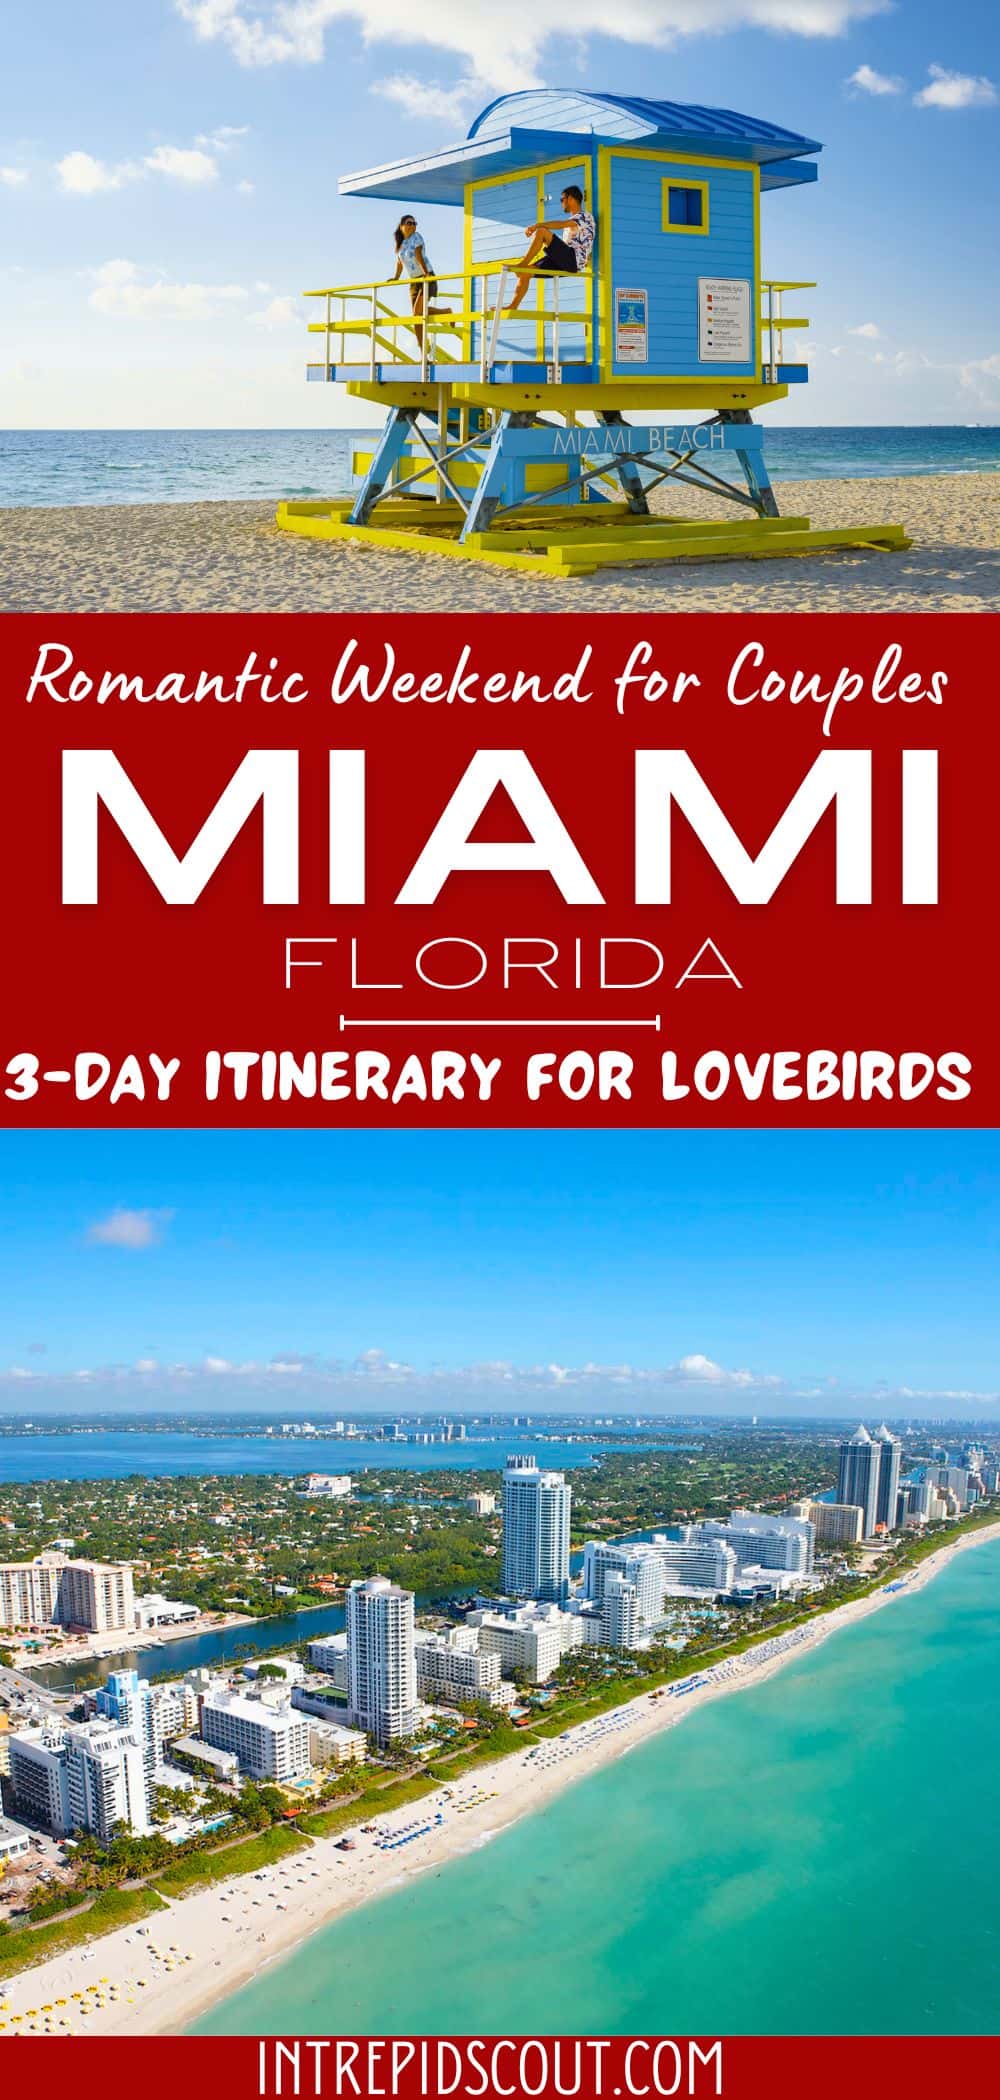 Romantic Weekend in Miami for Couples